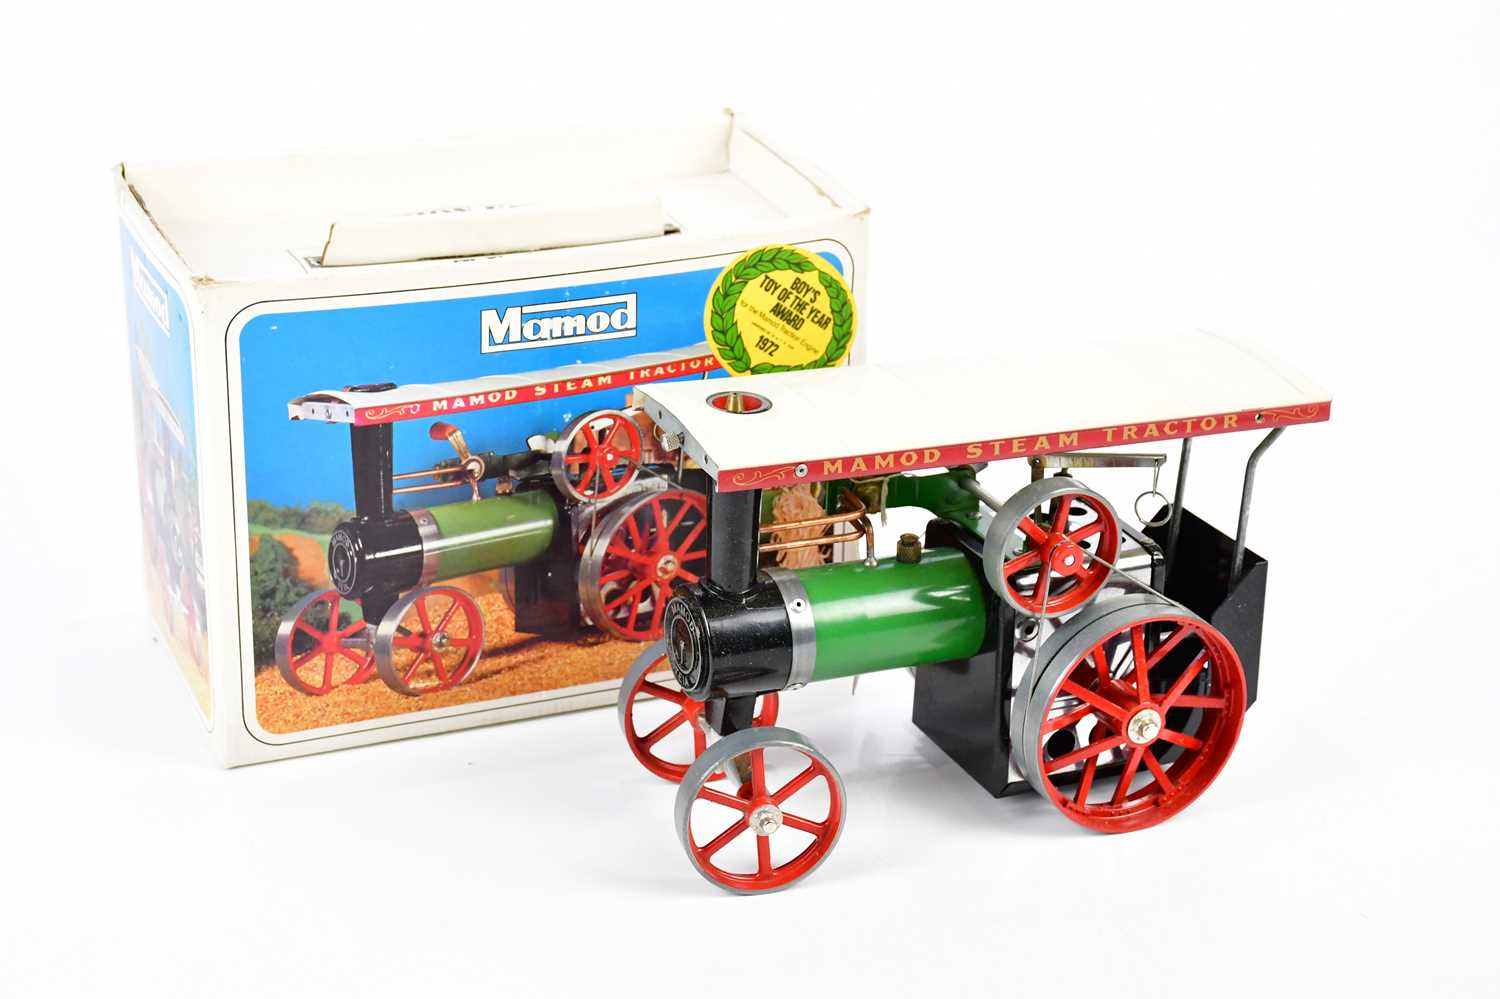 MAMOD; a boxed T.E.1a steam tractor, MAMOD engine mounted on plinth base and a wooden train. - Image 4 of 4